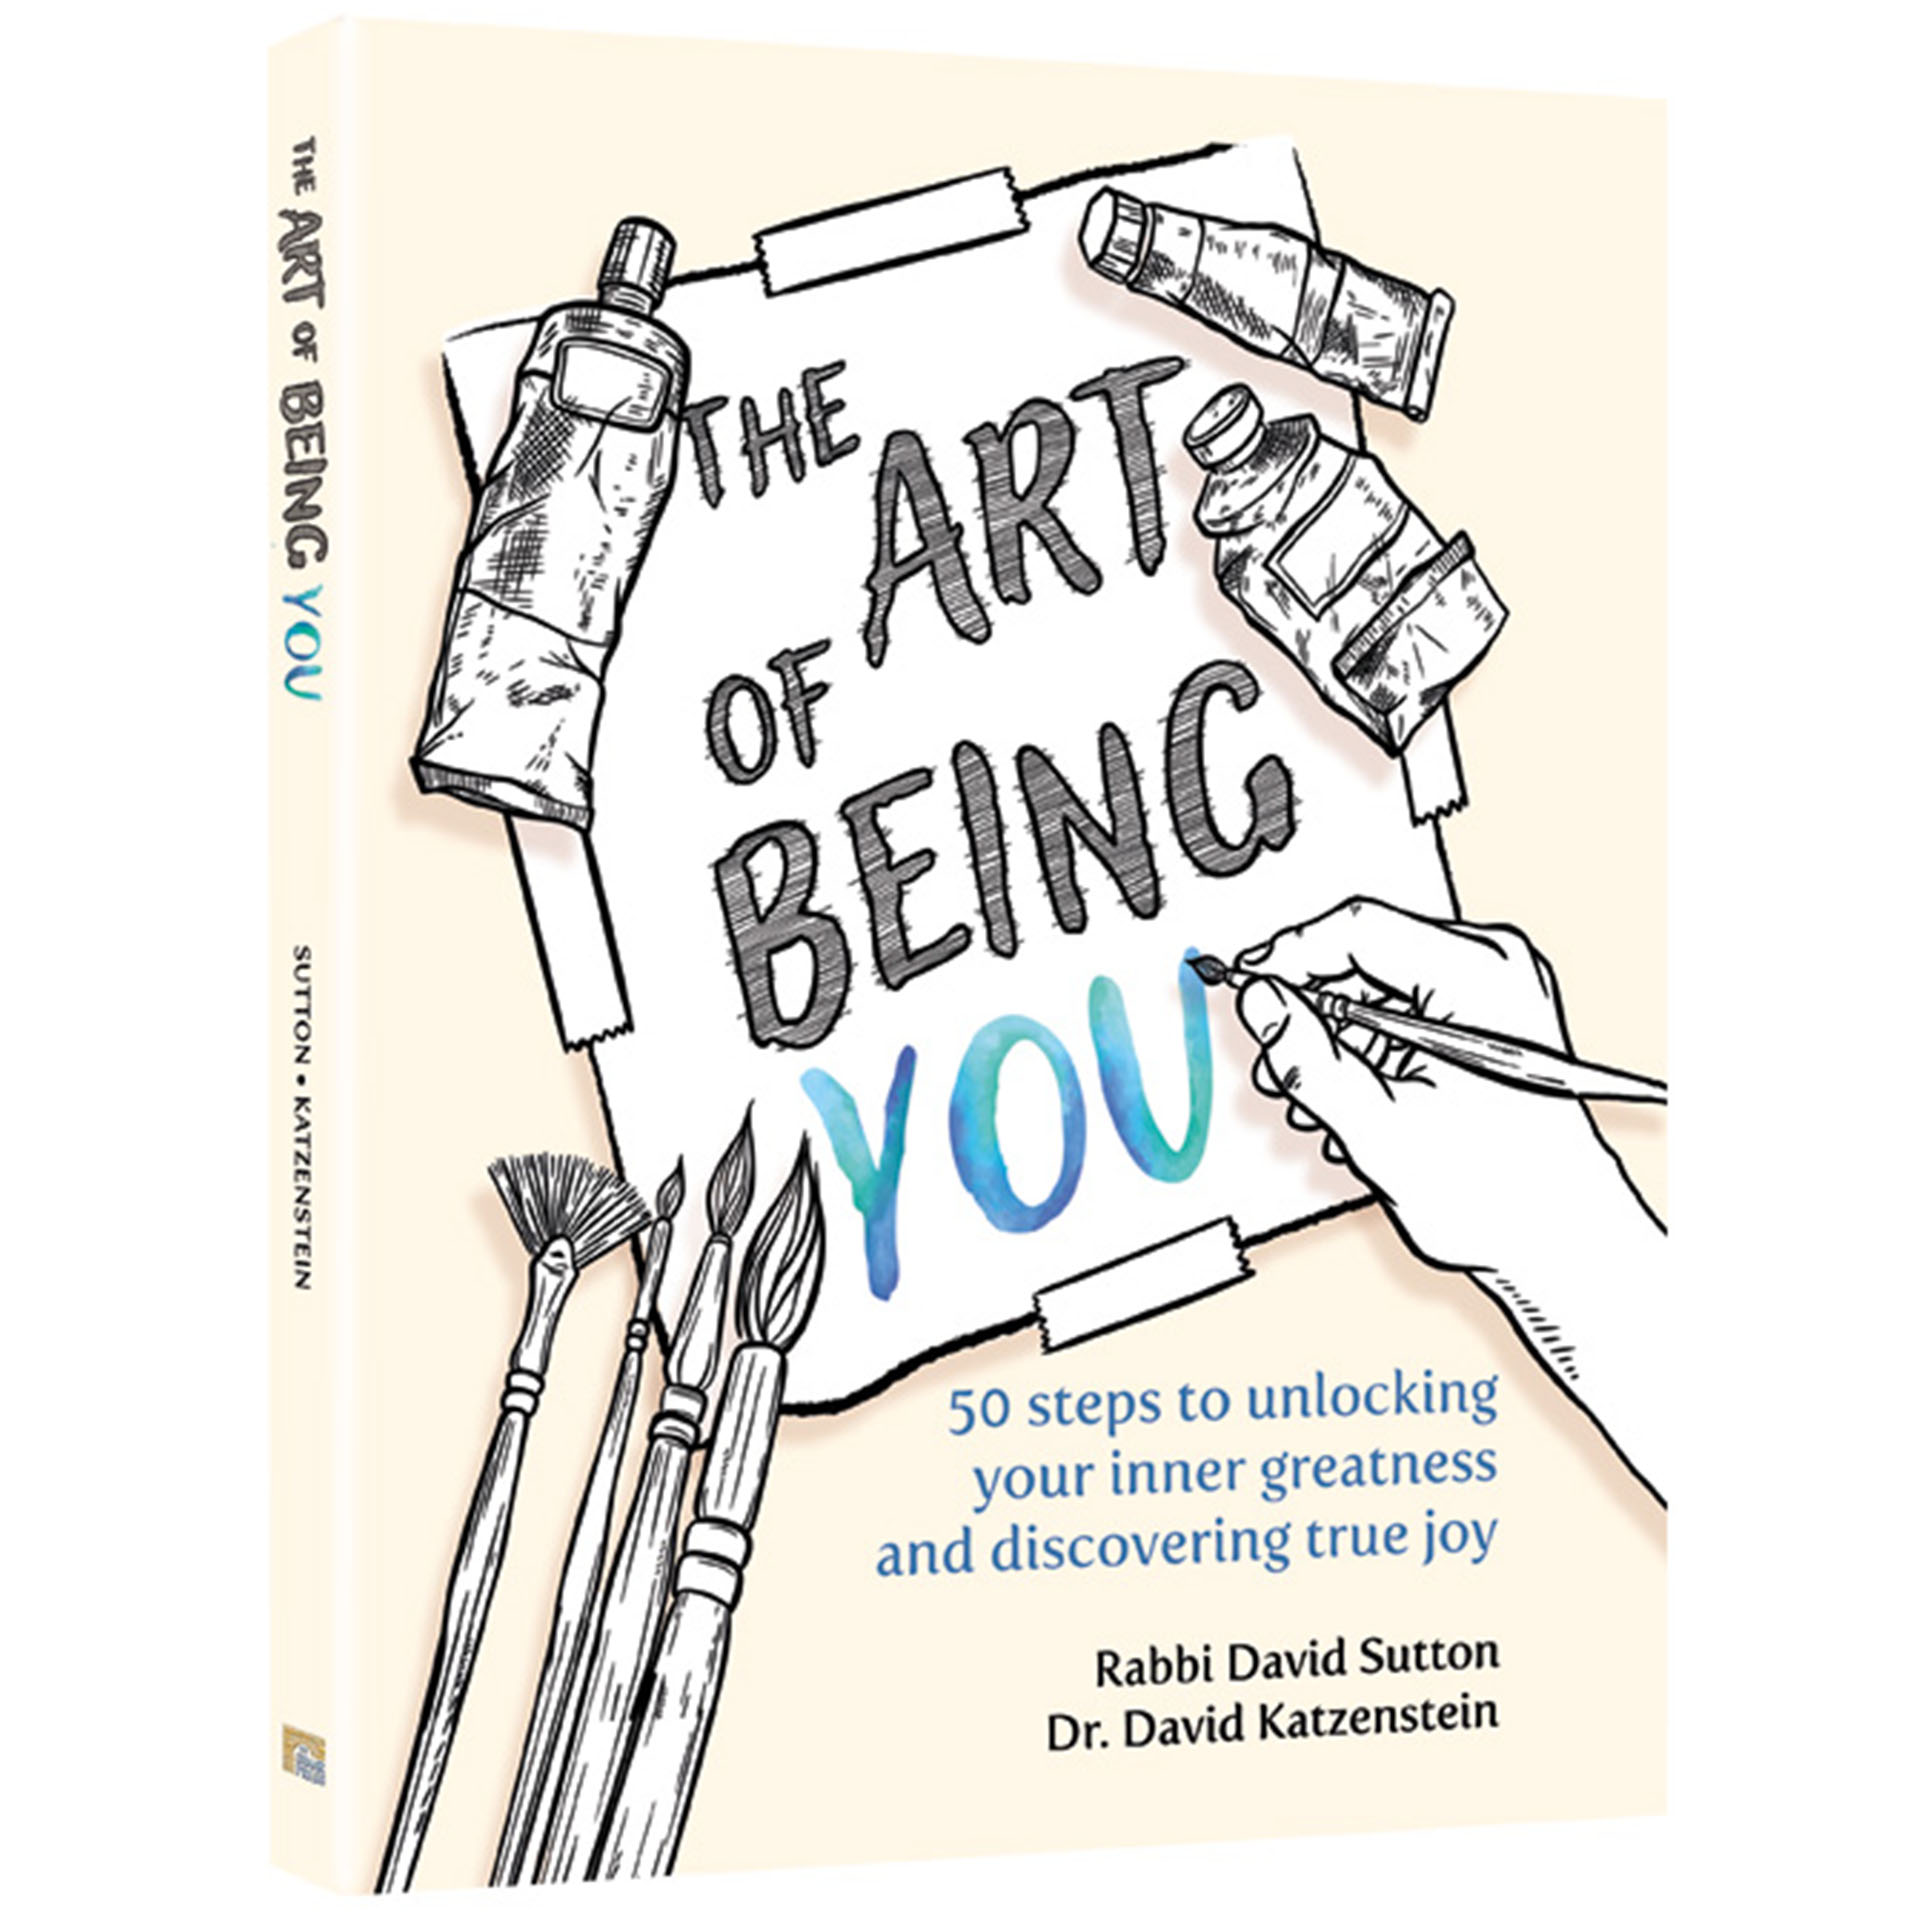 THE ART OF BEING YOU